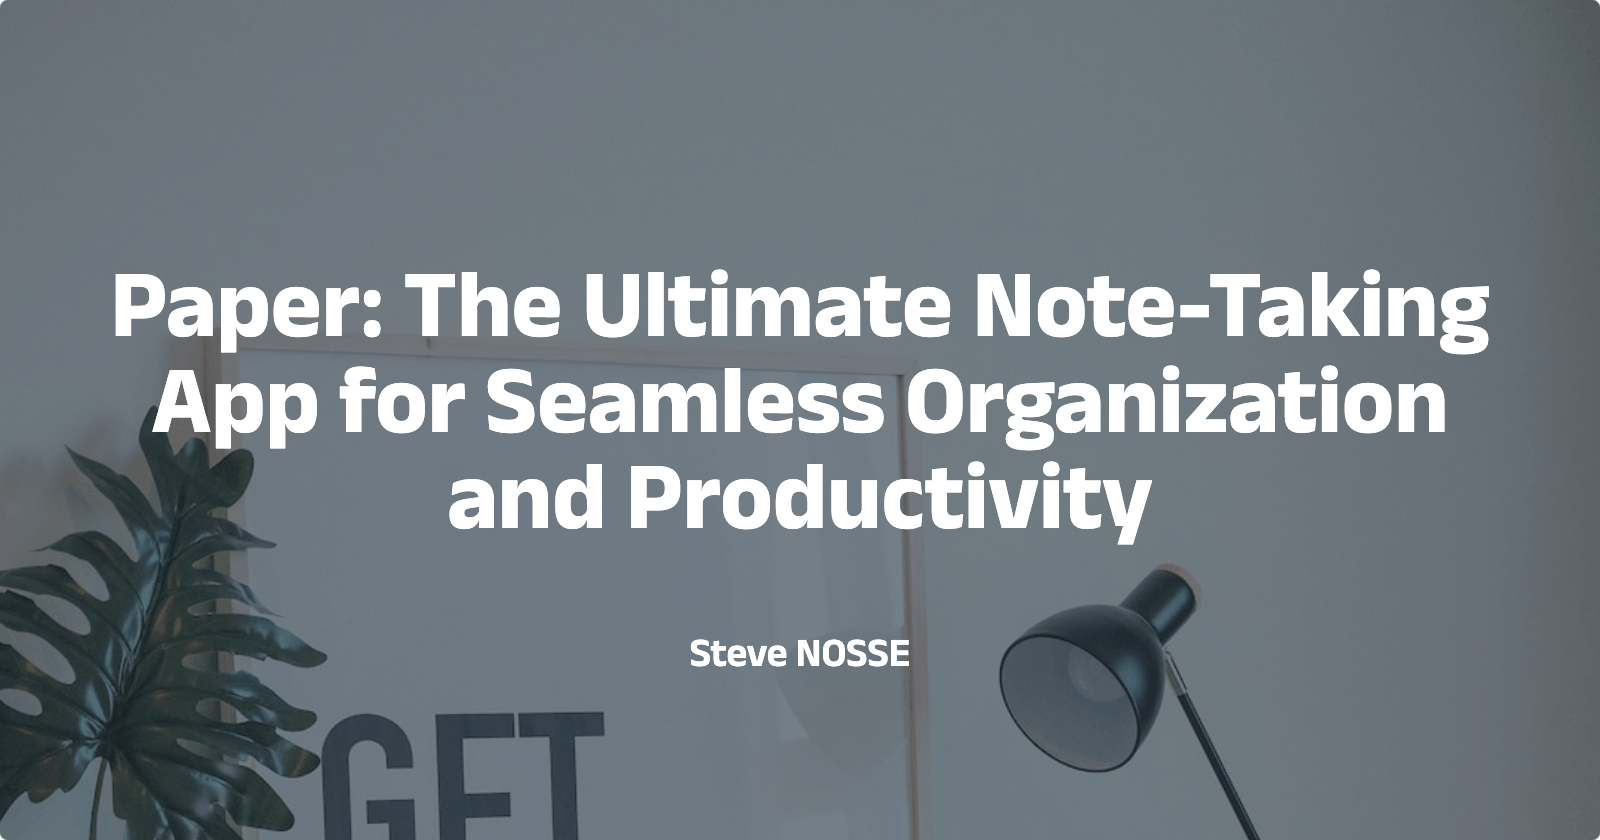 Paper: The Ultimate Note-Taking App for Seamless Organization and Productivity